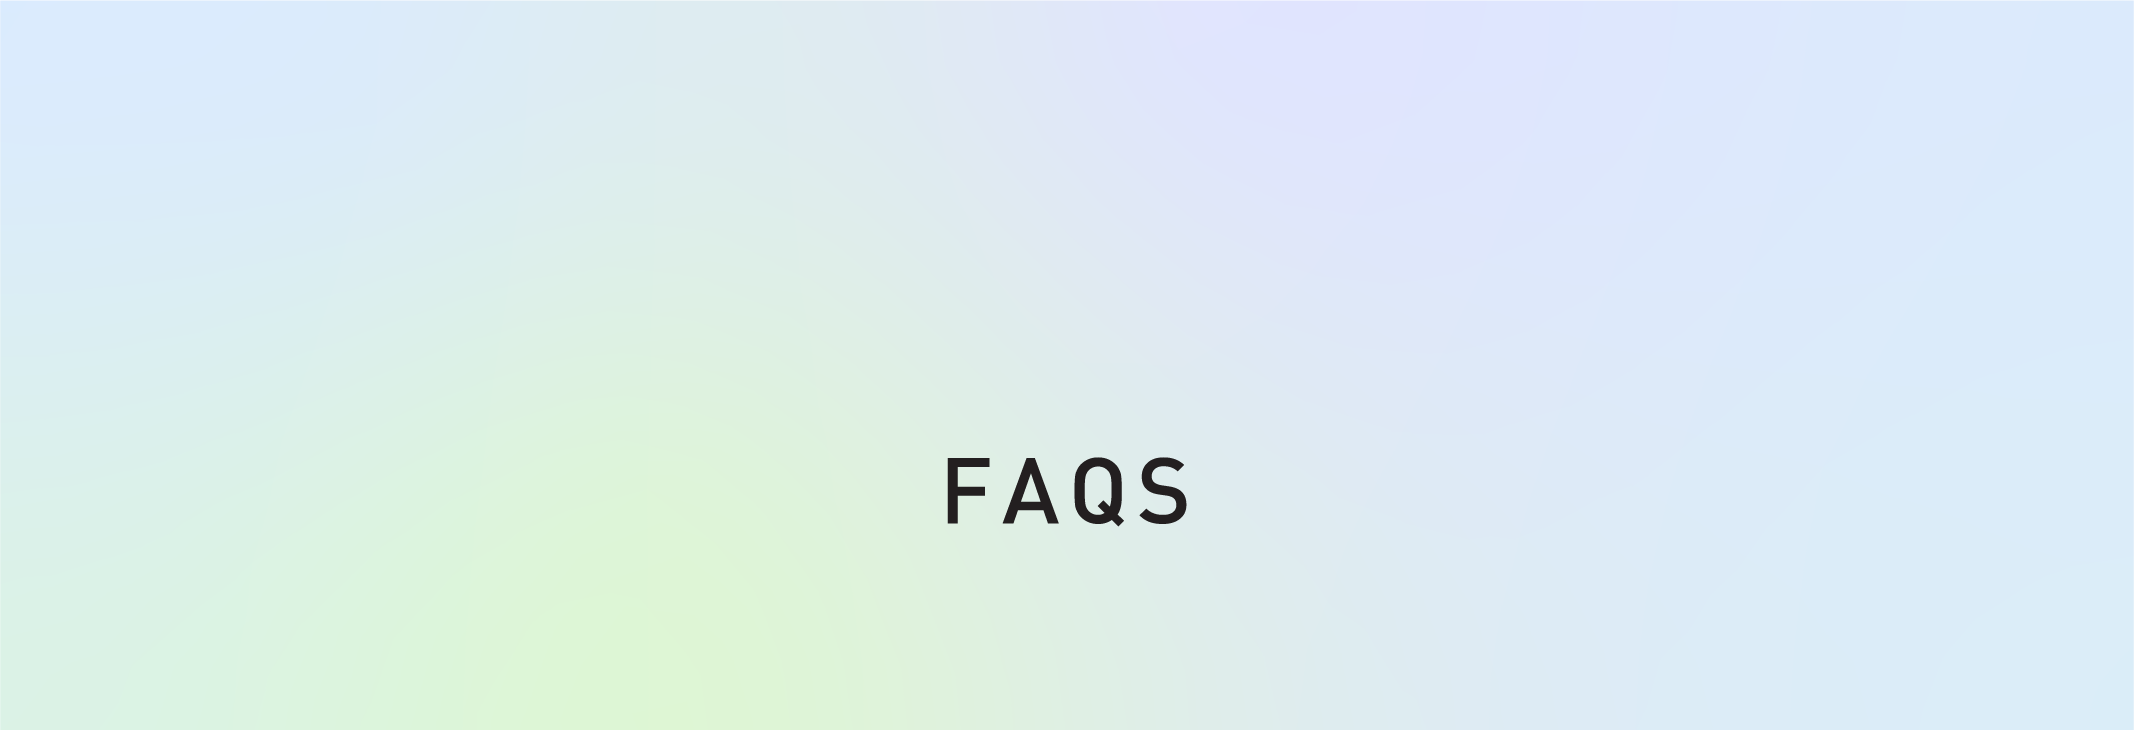 053024 Sub Banners Tablet FAQs